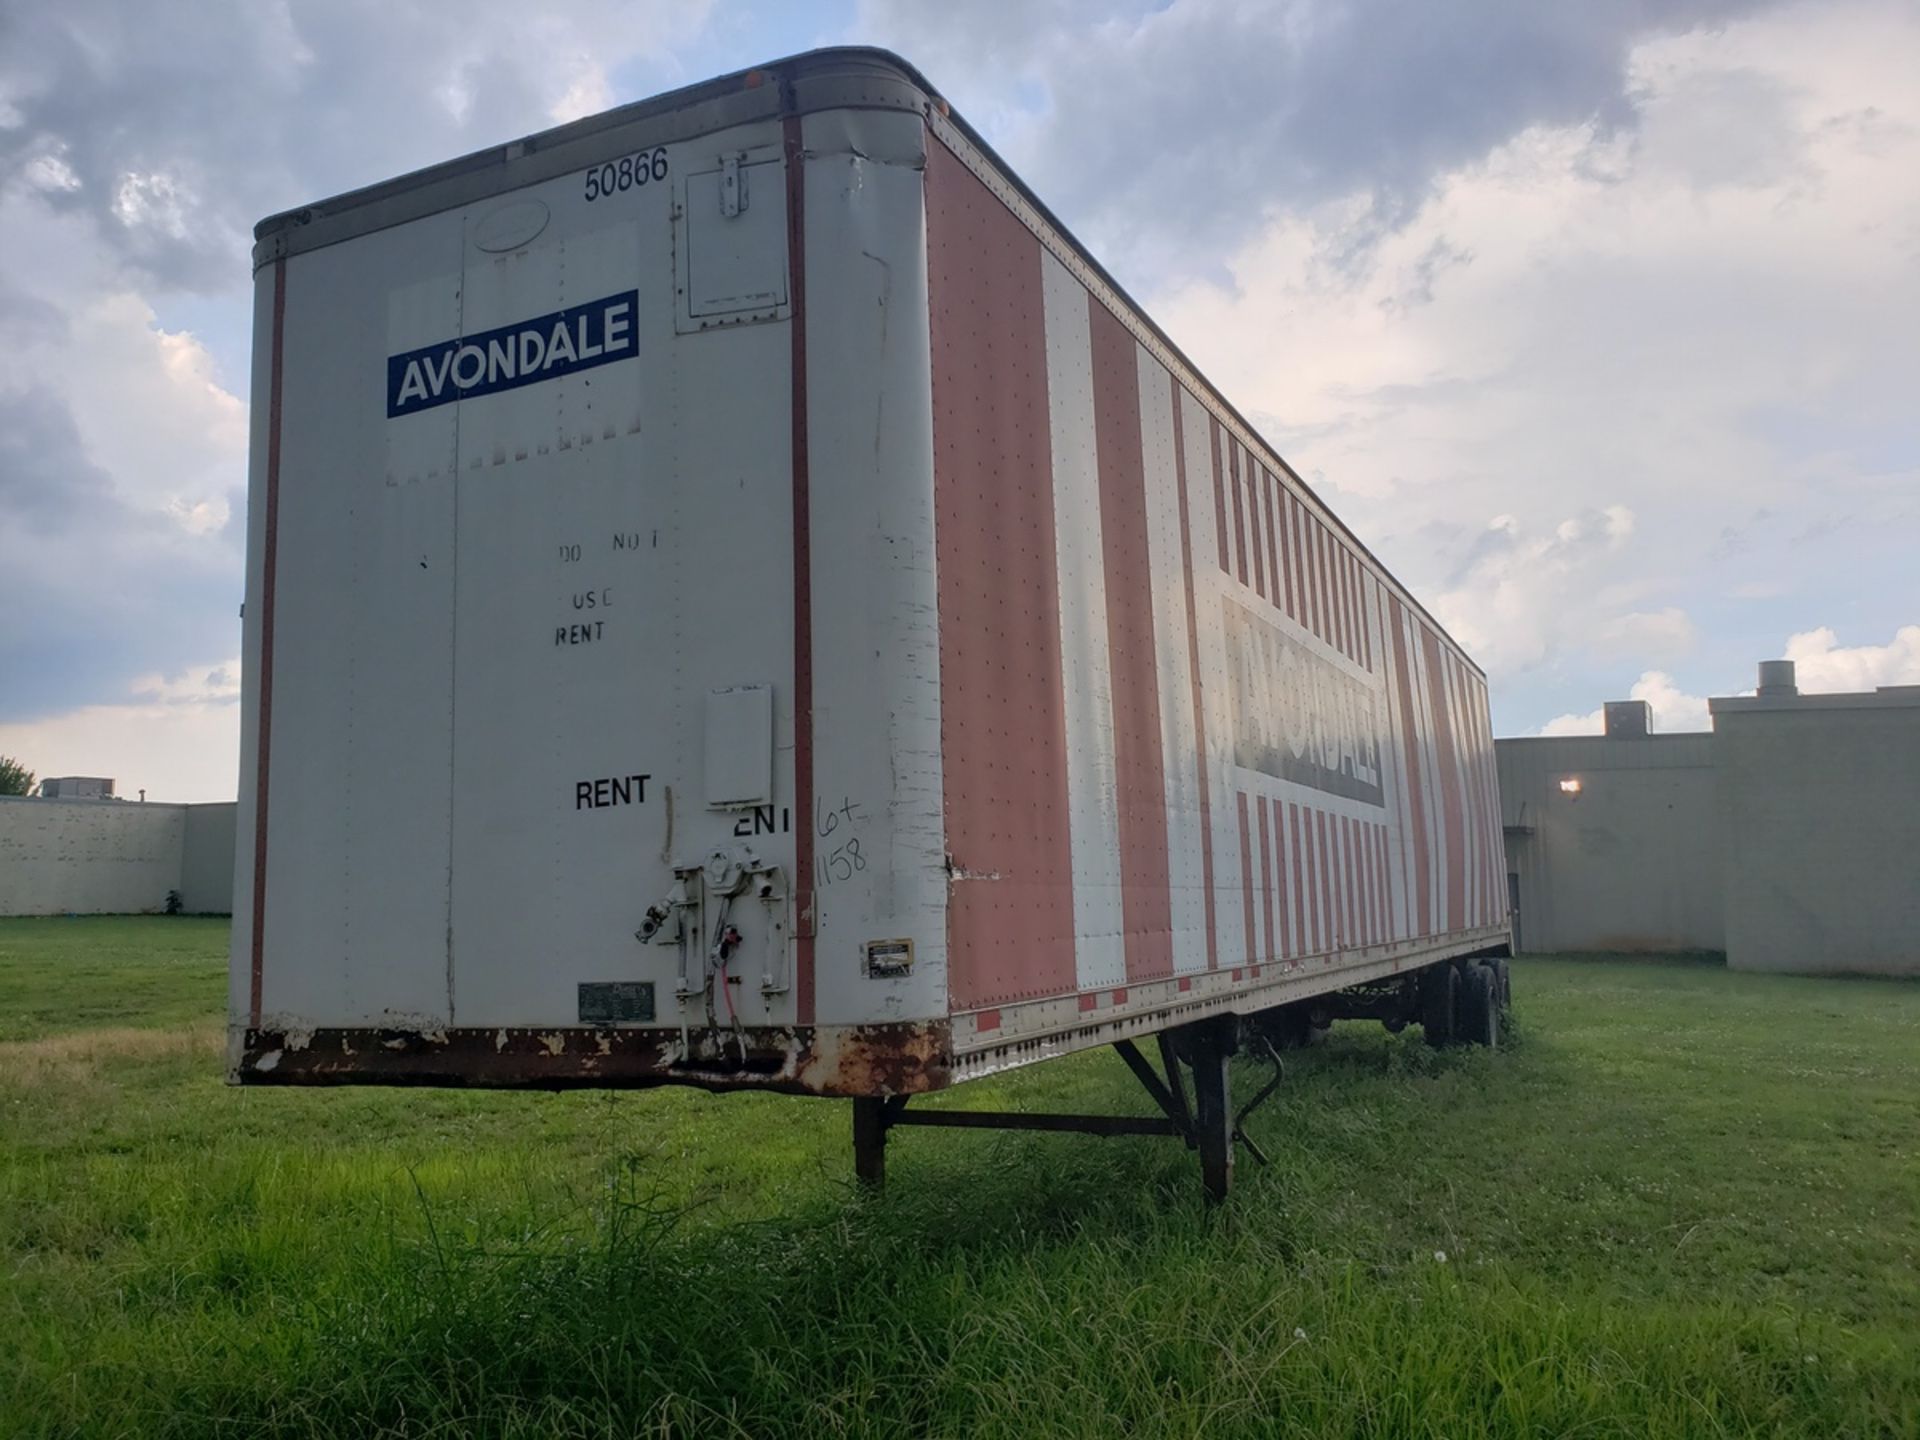 Dry Van Storage Trailer, Trailer # 50866. (No Title) Rig Fee: $Buyer To Remove